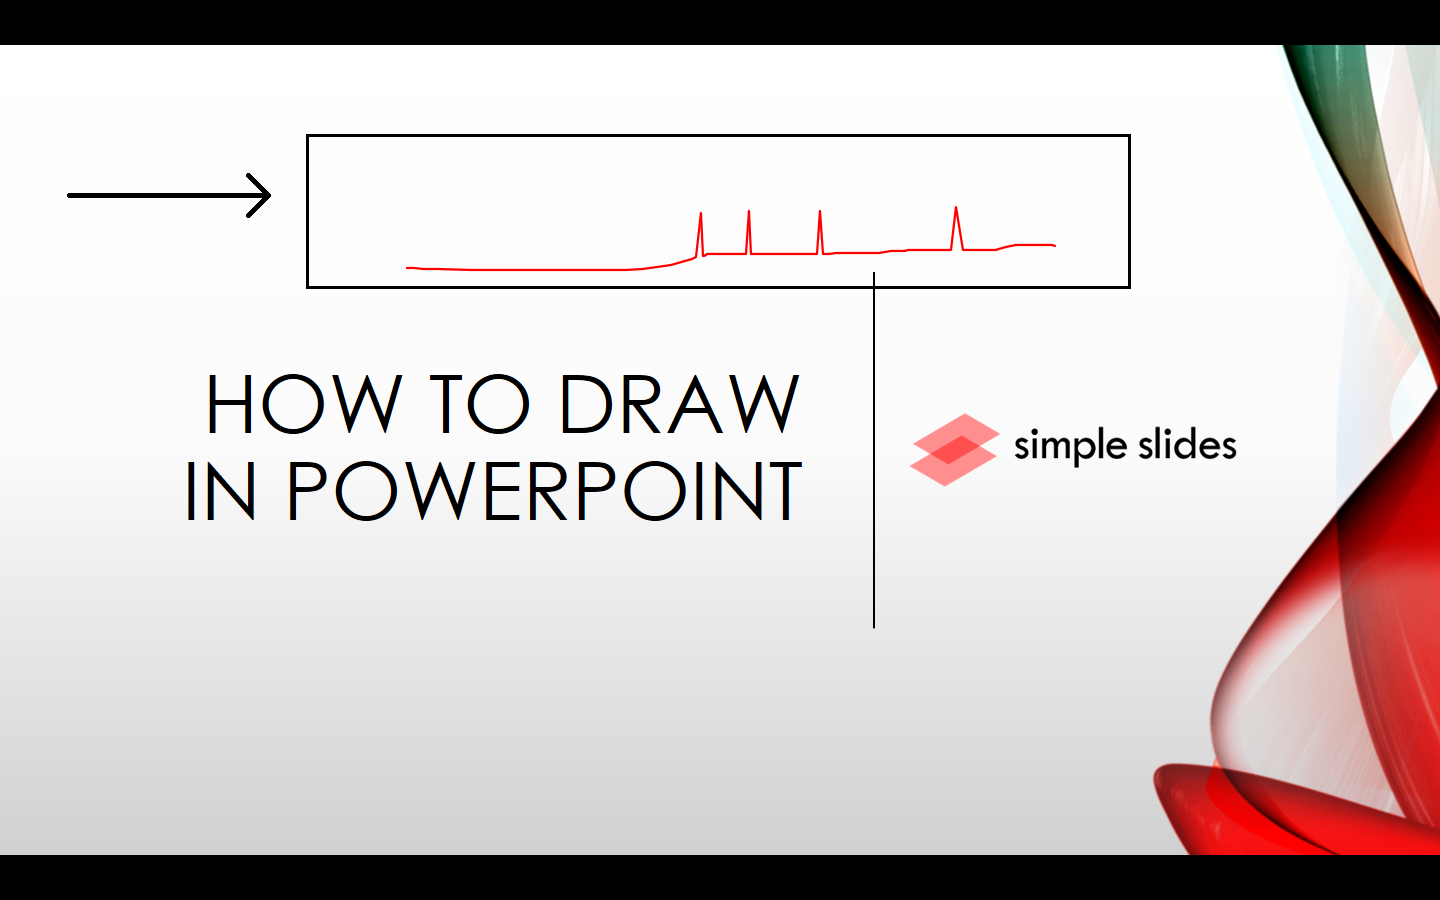 You can now draw and use your digital pen on your presentation.